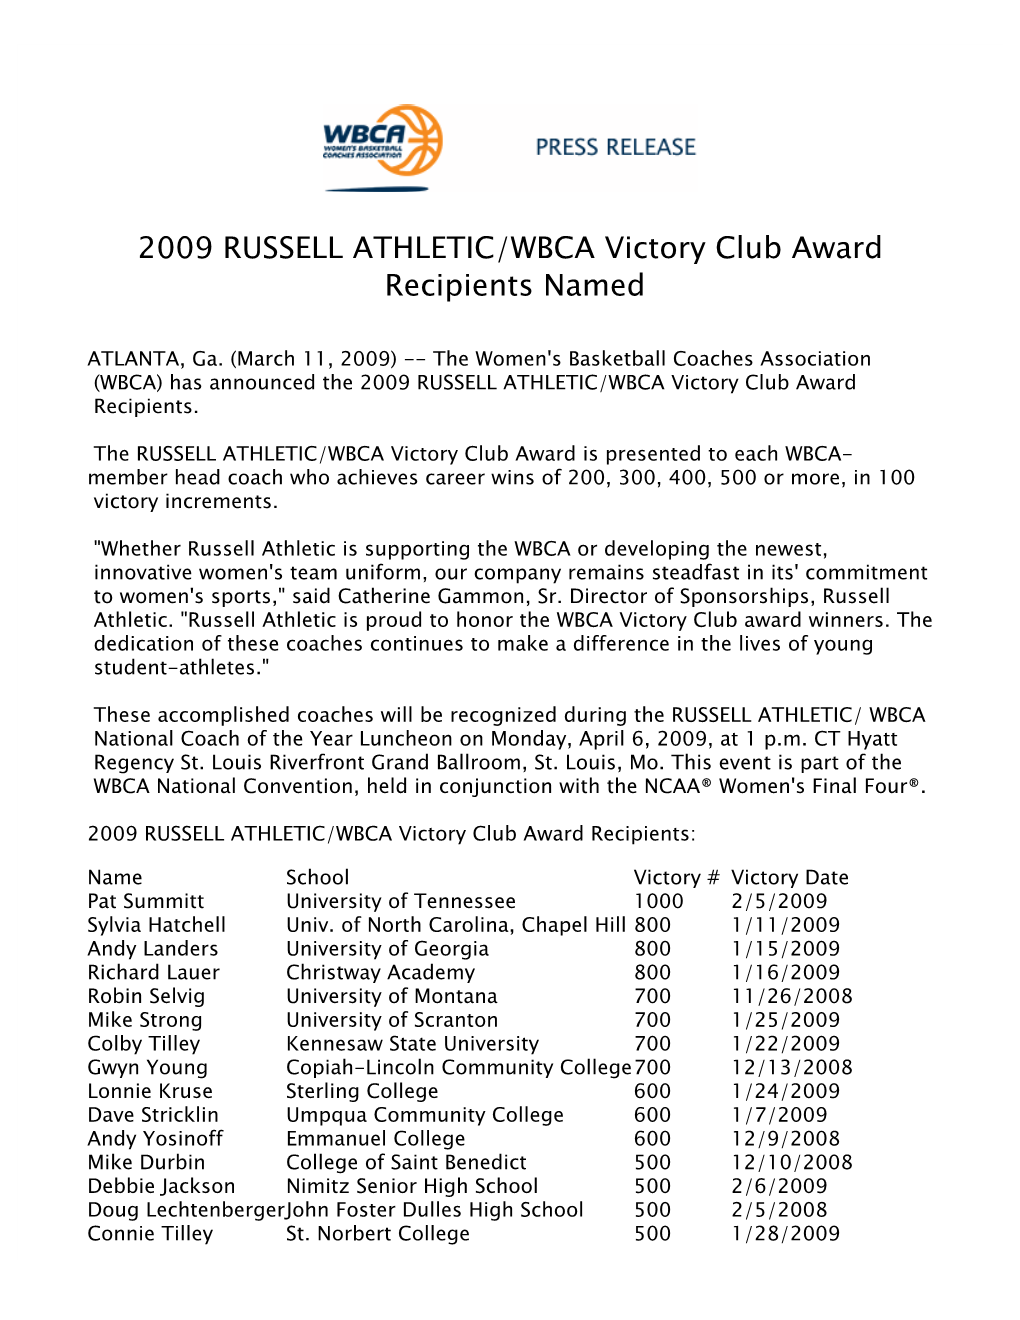 2009 RUSSELL ATHLETIC/WBCA Victory Club Award Recipients Named 2008-09 031109